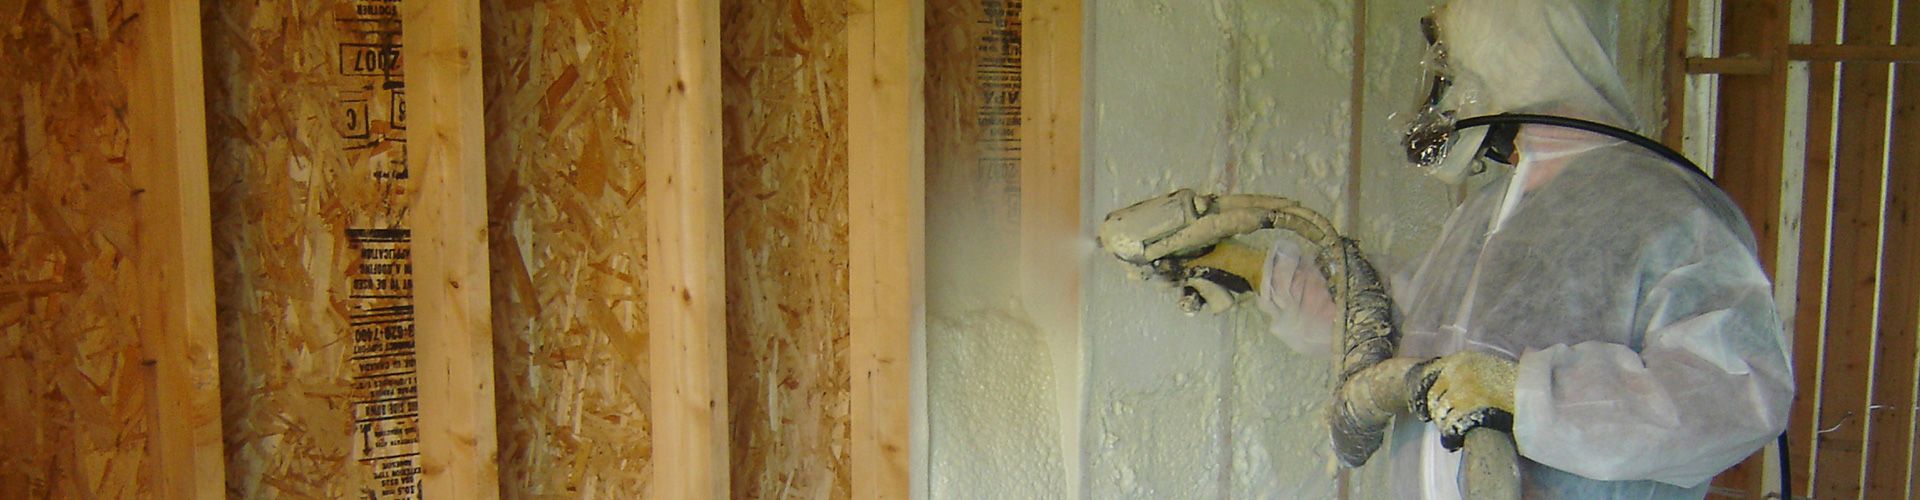 residential spray foam insulation services for new construction